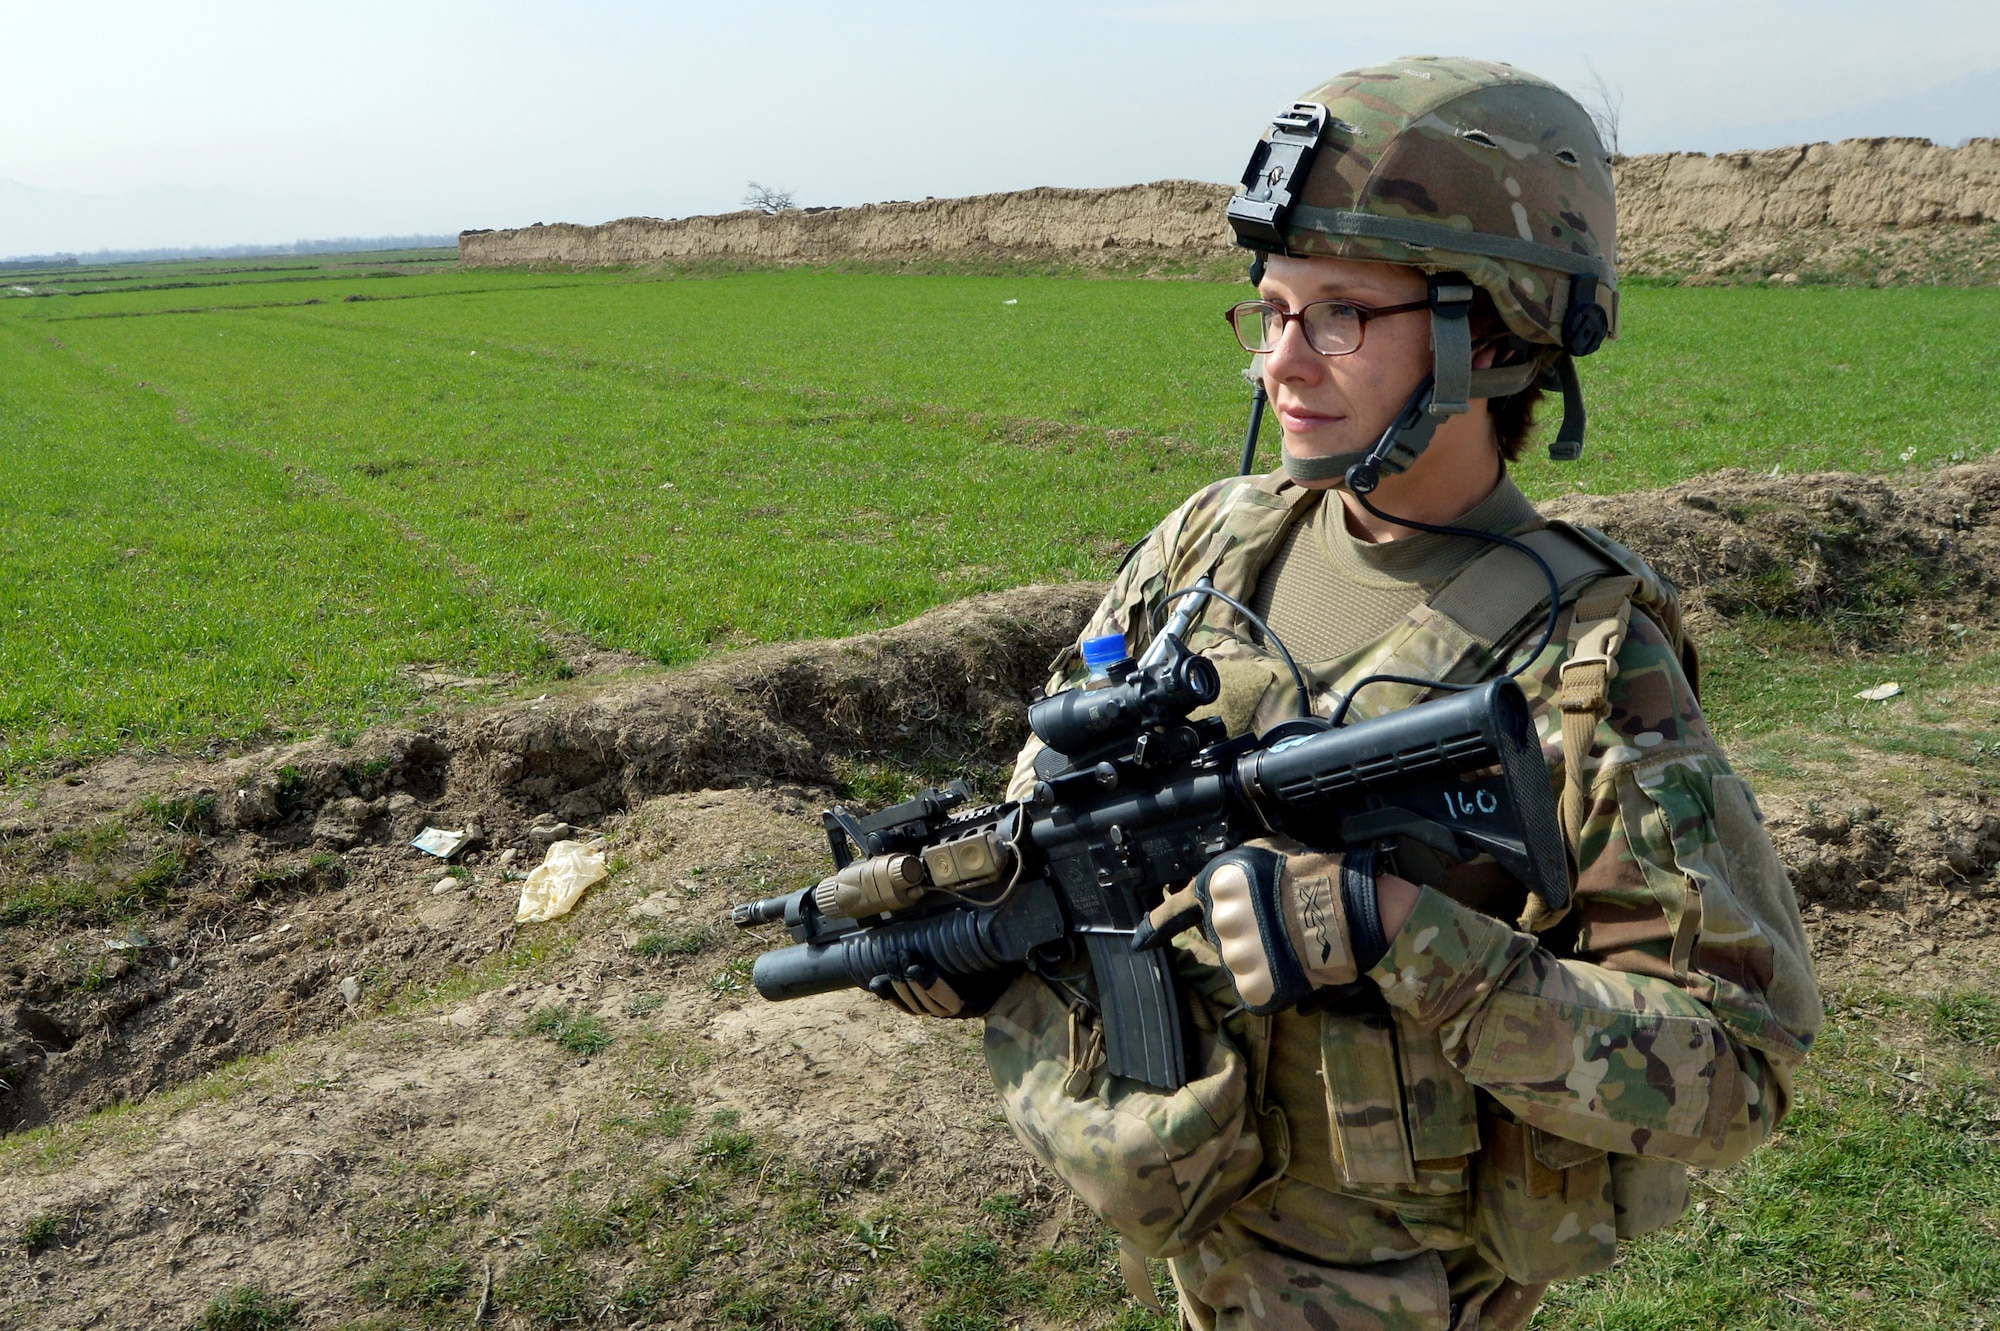 Staff Sgt. Elizabeth Rosato, 755th Expeditionary Security Forces Squadron Reaper Team 1 member, patrols a village near Bagram Airfield, Afghanistan, March 11, 2013.  These groups of security forces members operate missions “outside the wire” providing security during key leader engagements and meetings with the local community. (U.S. Air Force photo/Senior Airman Chris Willis)